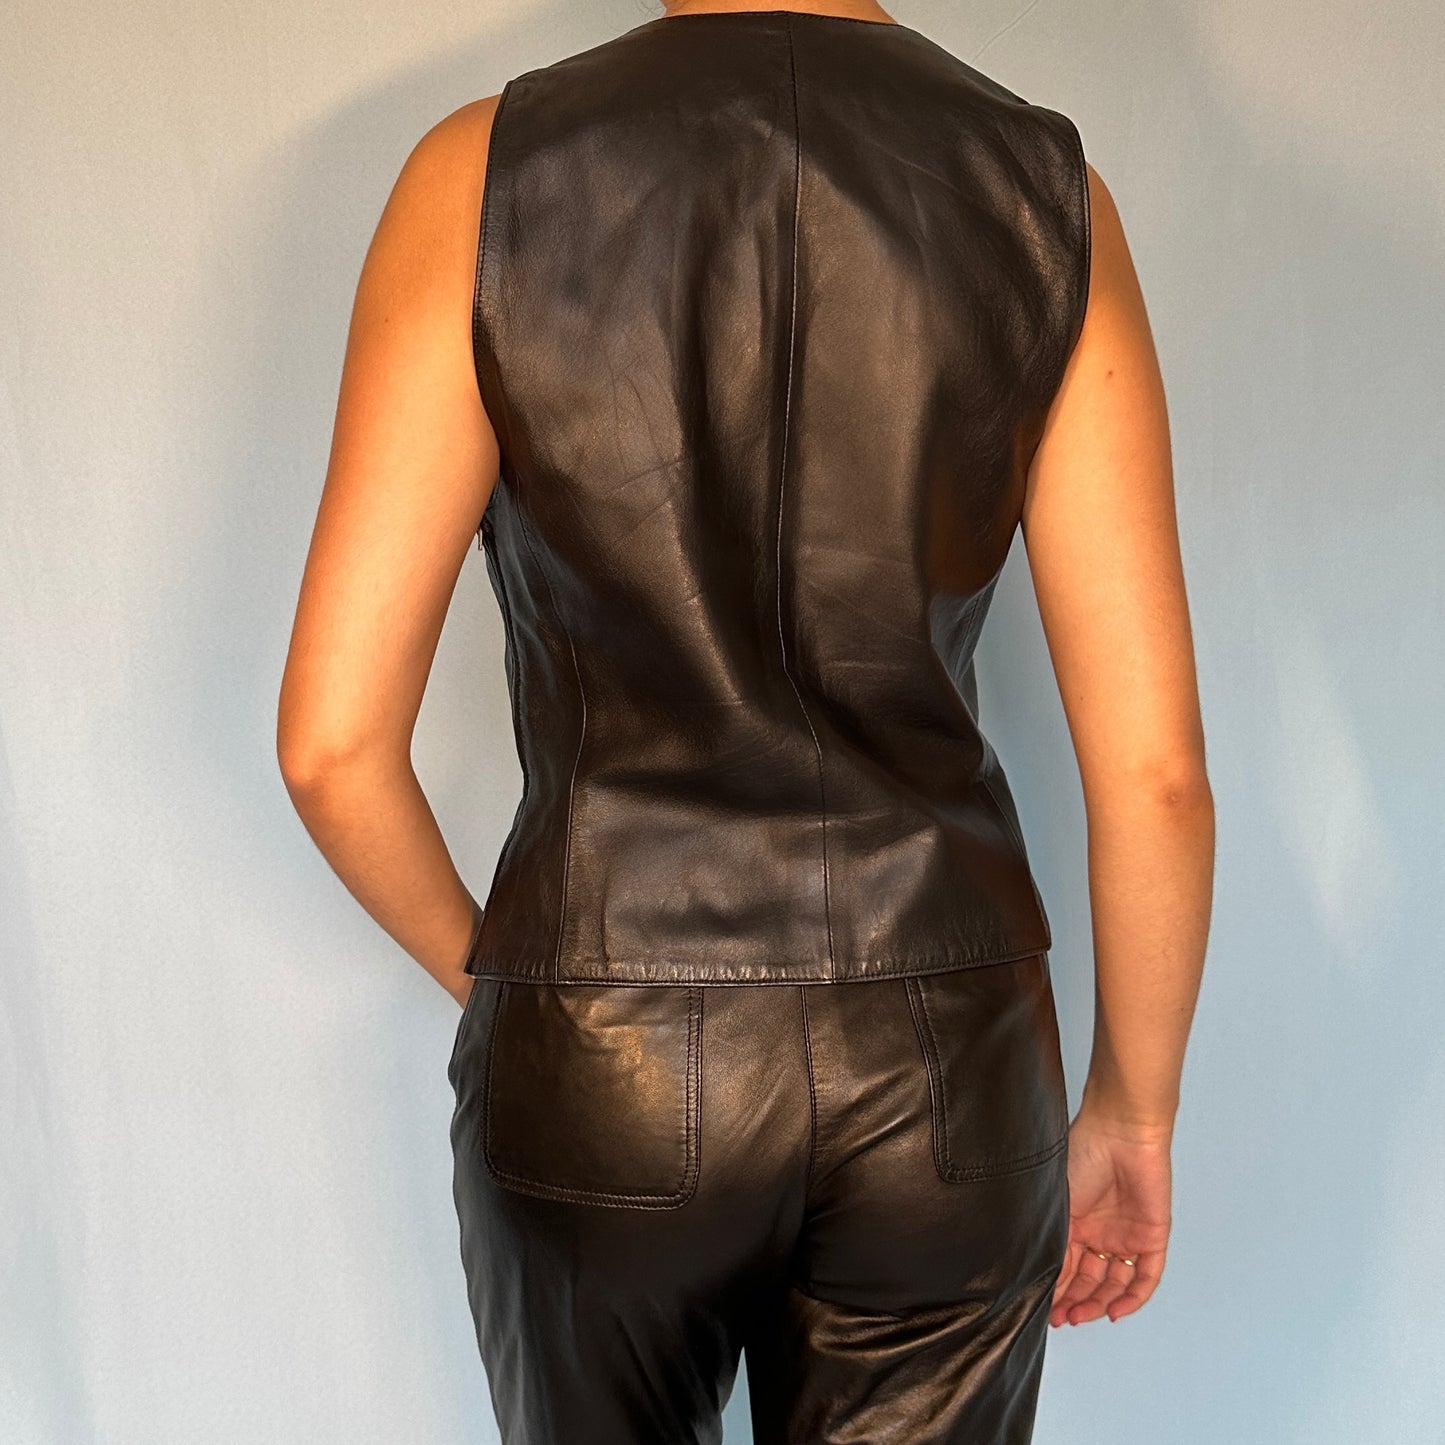 Helmut Lang Fall 1992 Runway Black Leather Open Laced Front Top